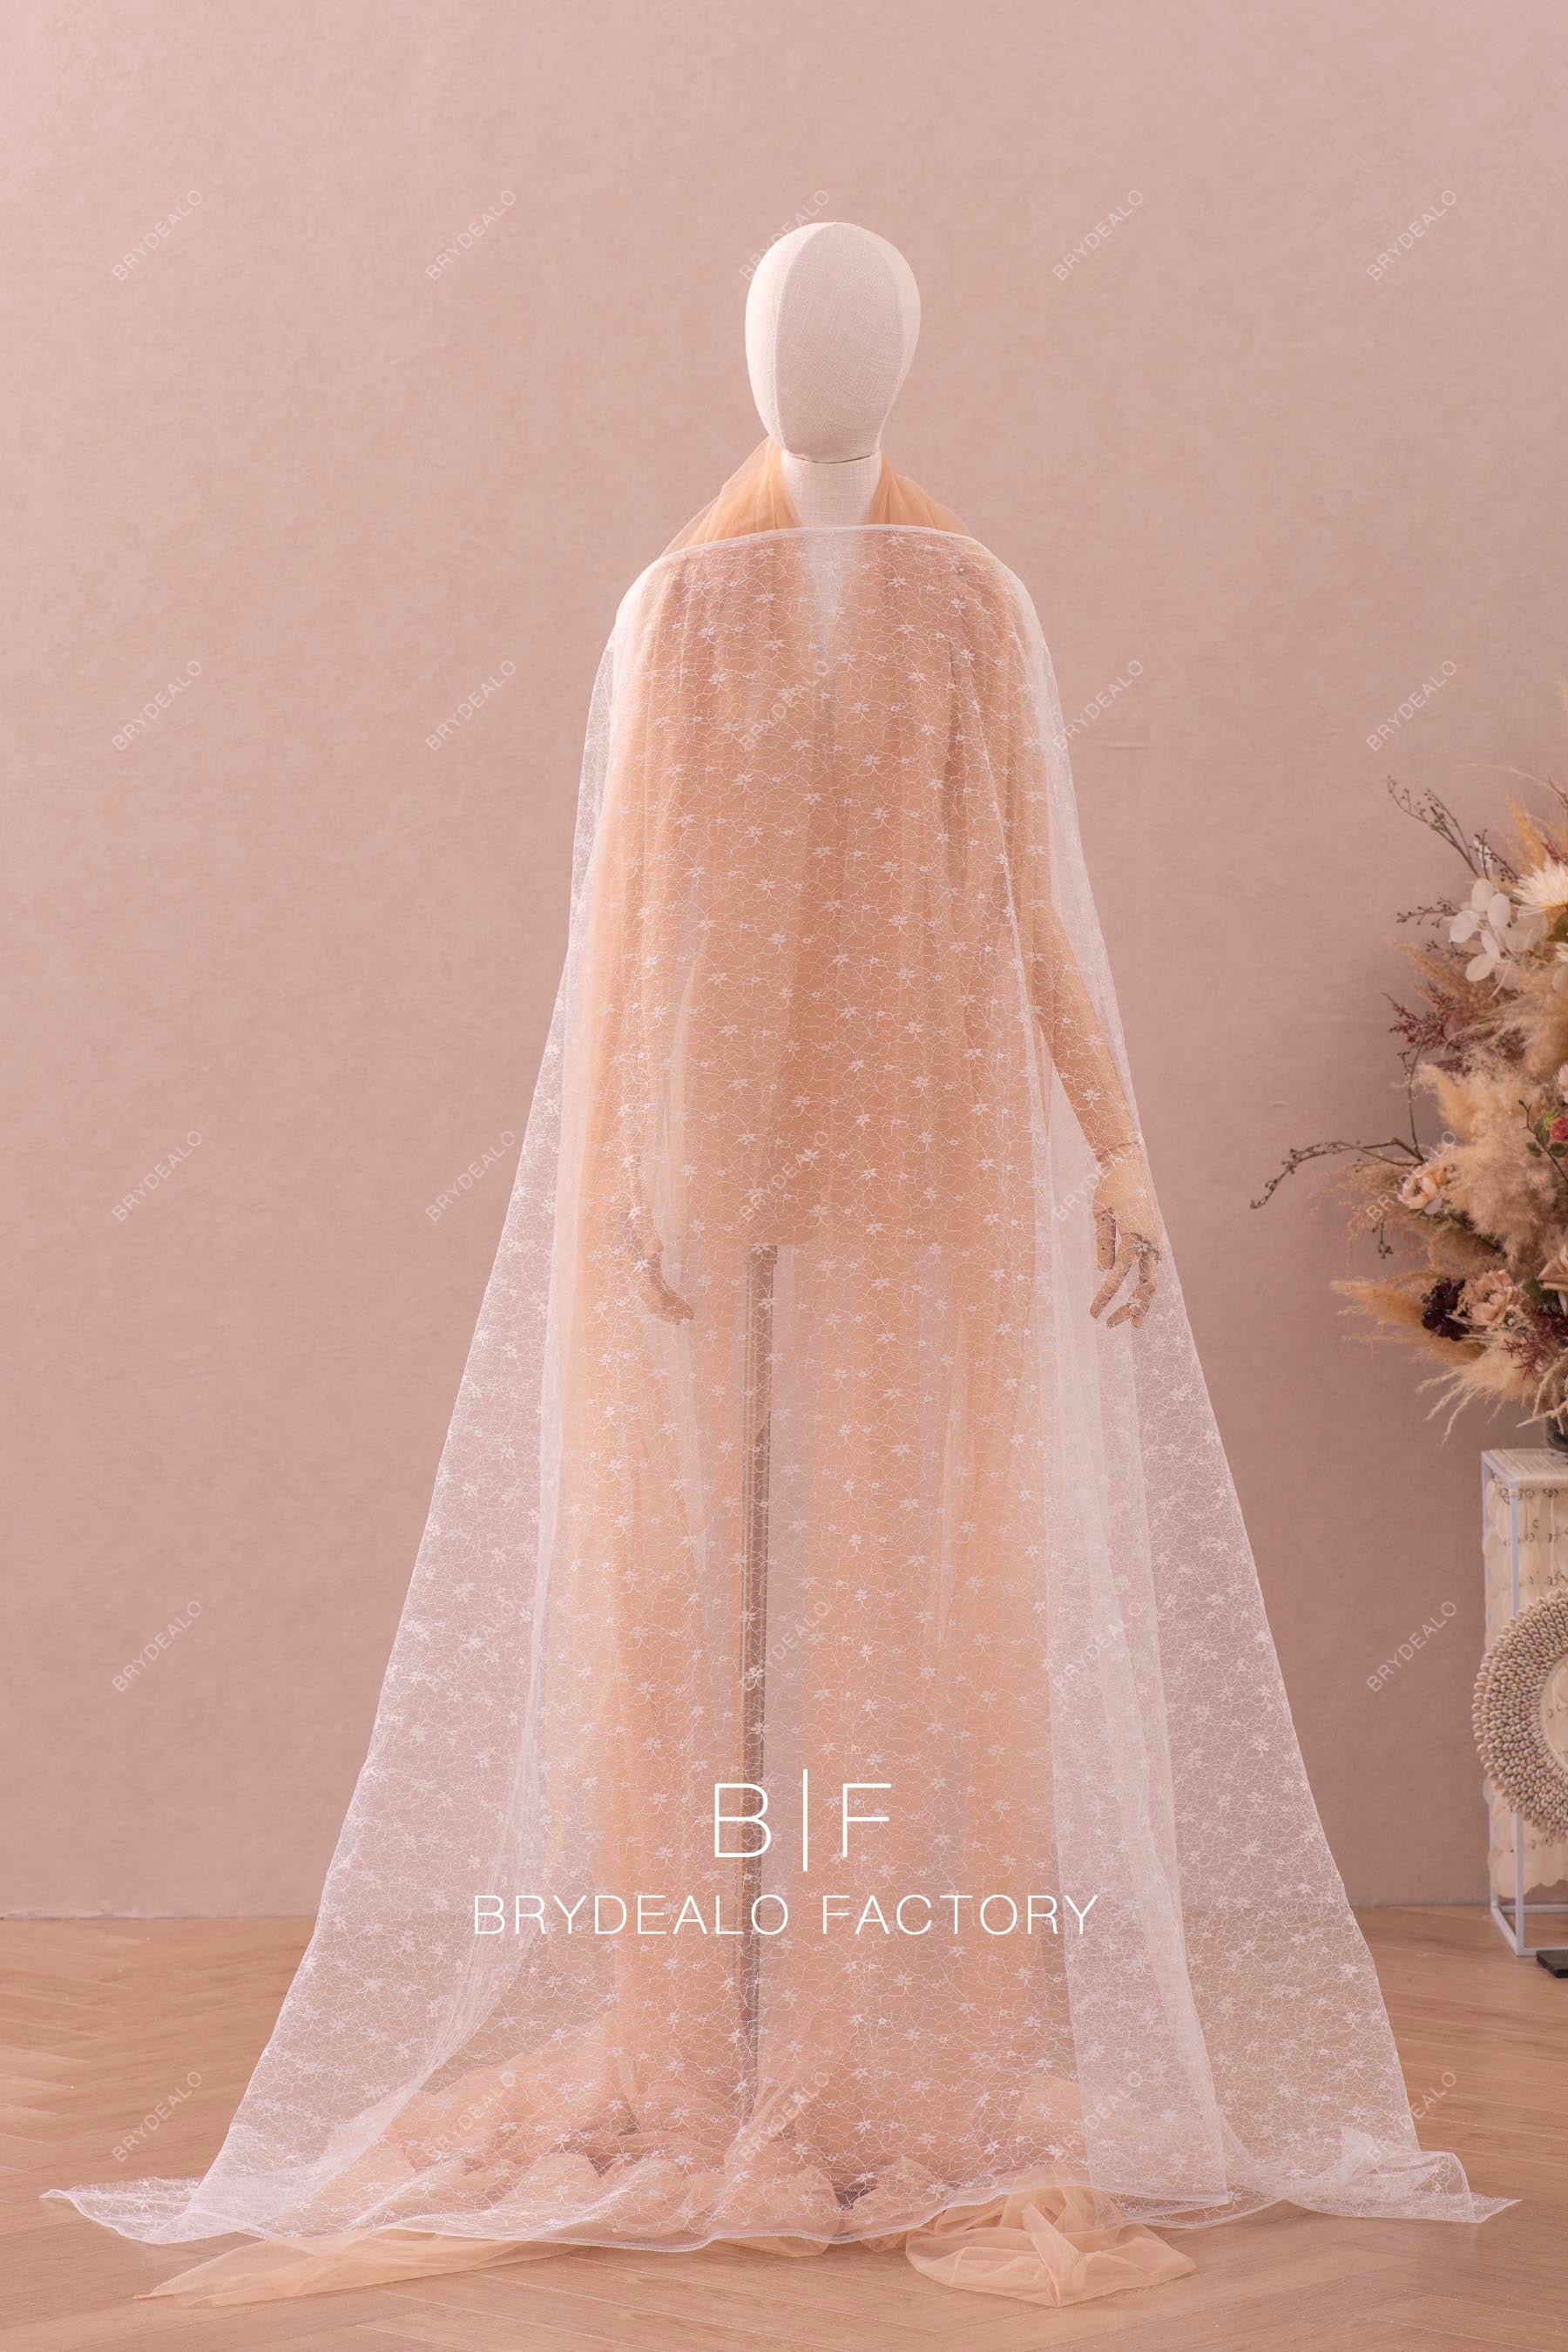 fashionable warp knitted lace online